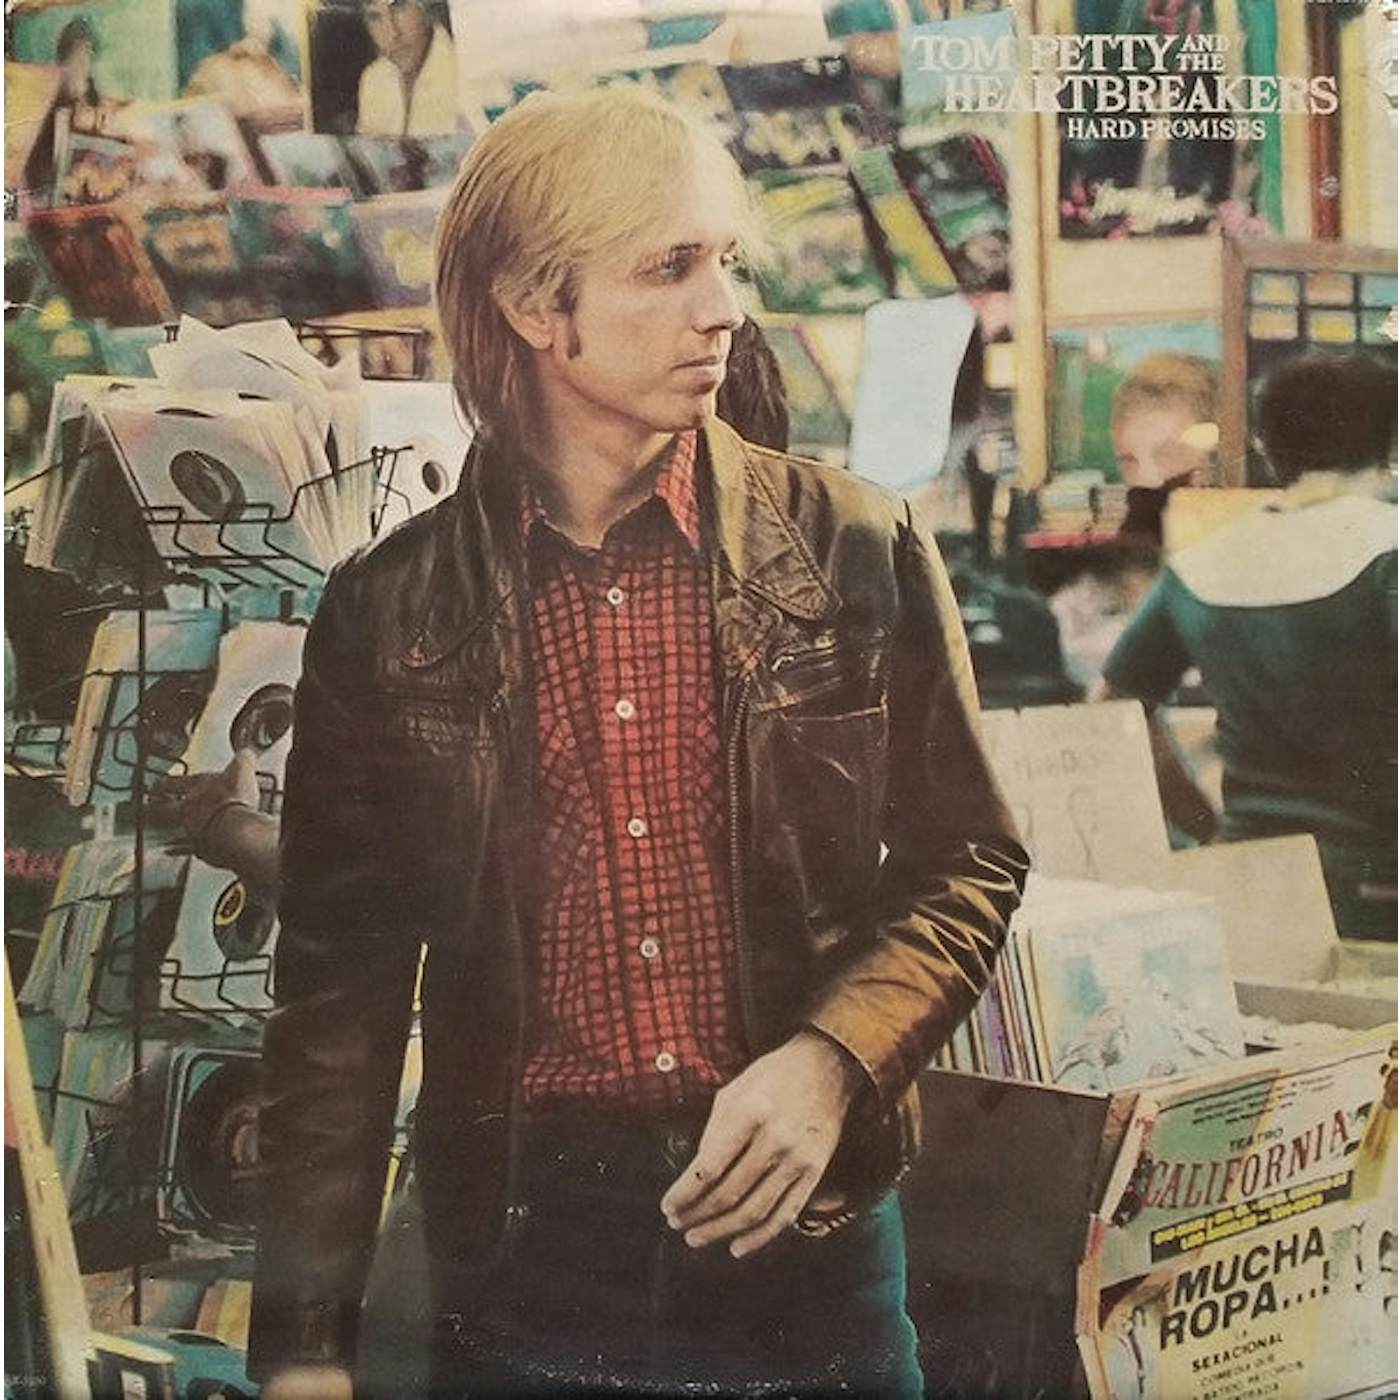 Tom Petty and the Heartbreakers Hard Promises